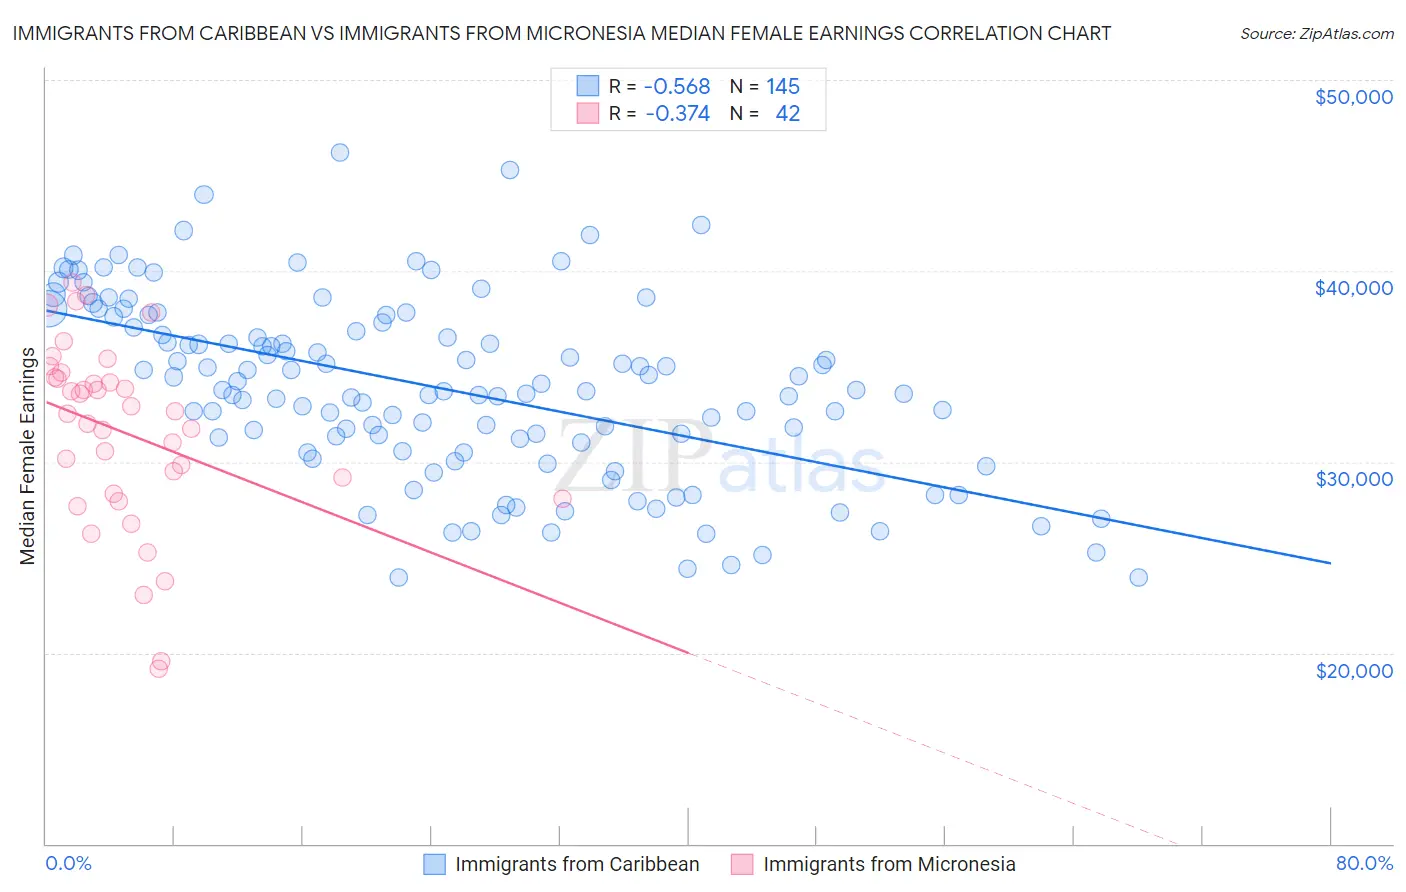 Immigrants from Caribbean vs Immigrants from Micronesia Median Female Earnings